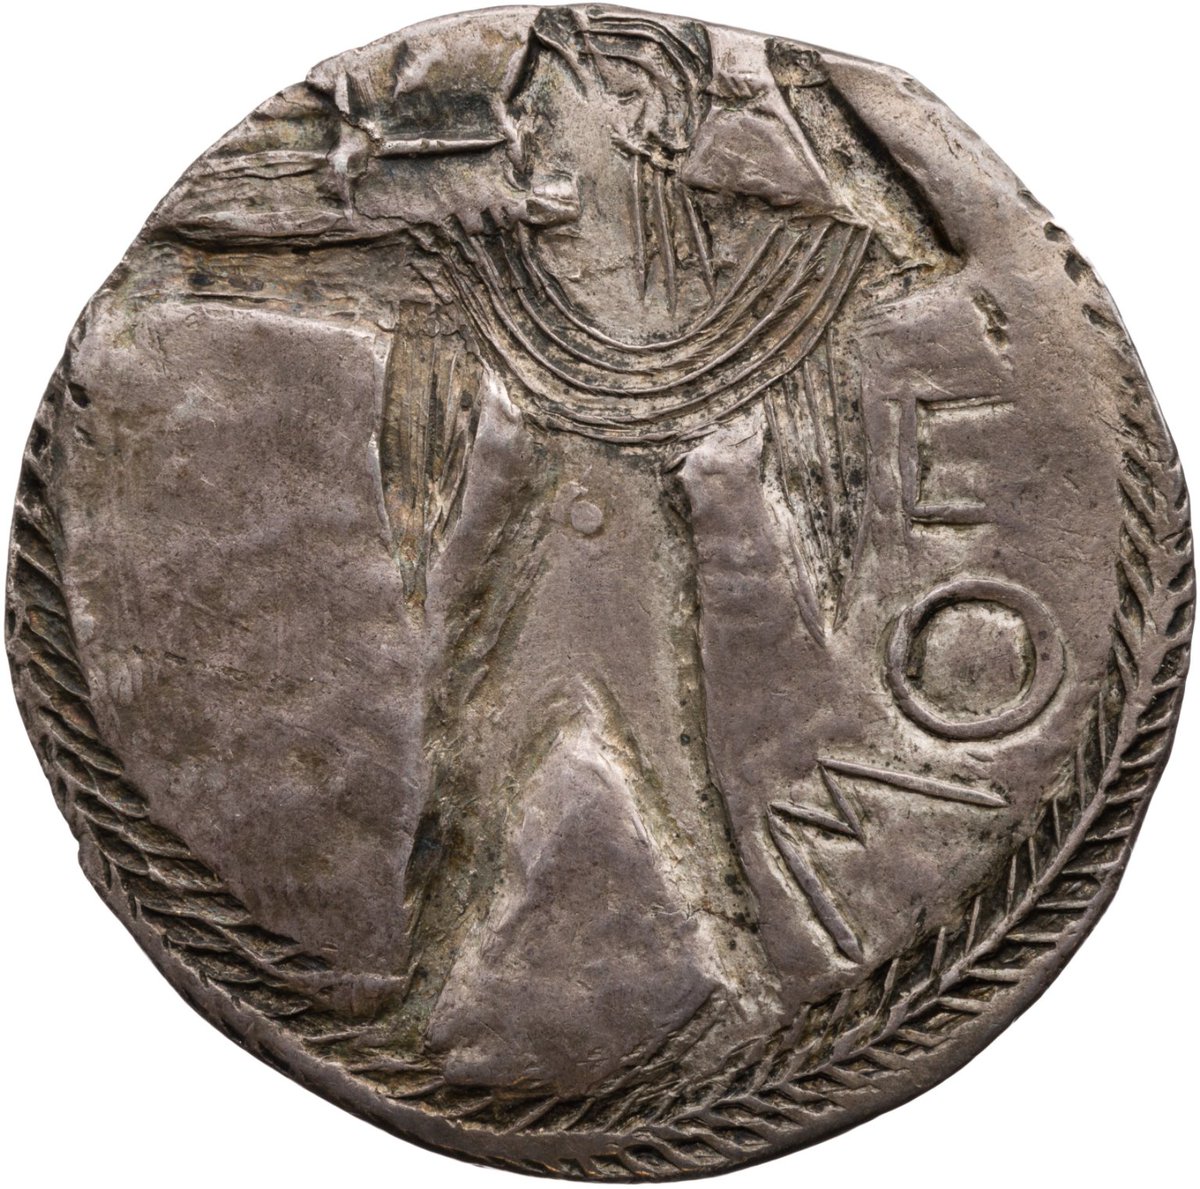 A similar design was issued by Poseidonia, appropriately enough showing a striding - yet beardless - Poseidon wearing a chlamys and carrying a raised trident. Image: ANS 1957.172.313. Link -  http://numismatics.org/collection/1957.172.313